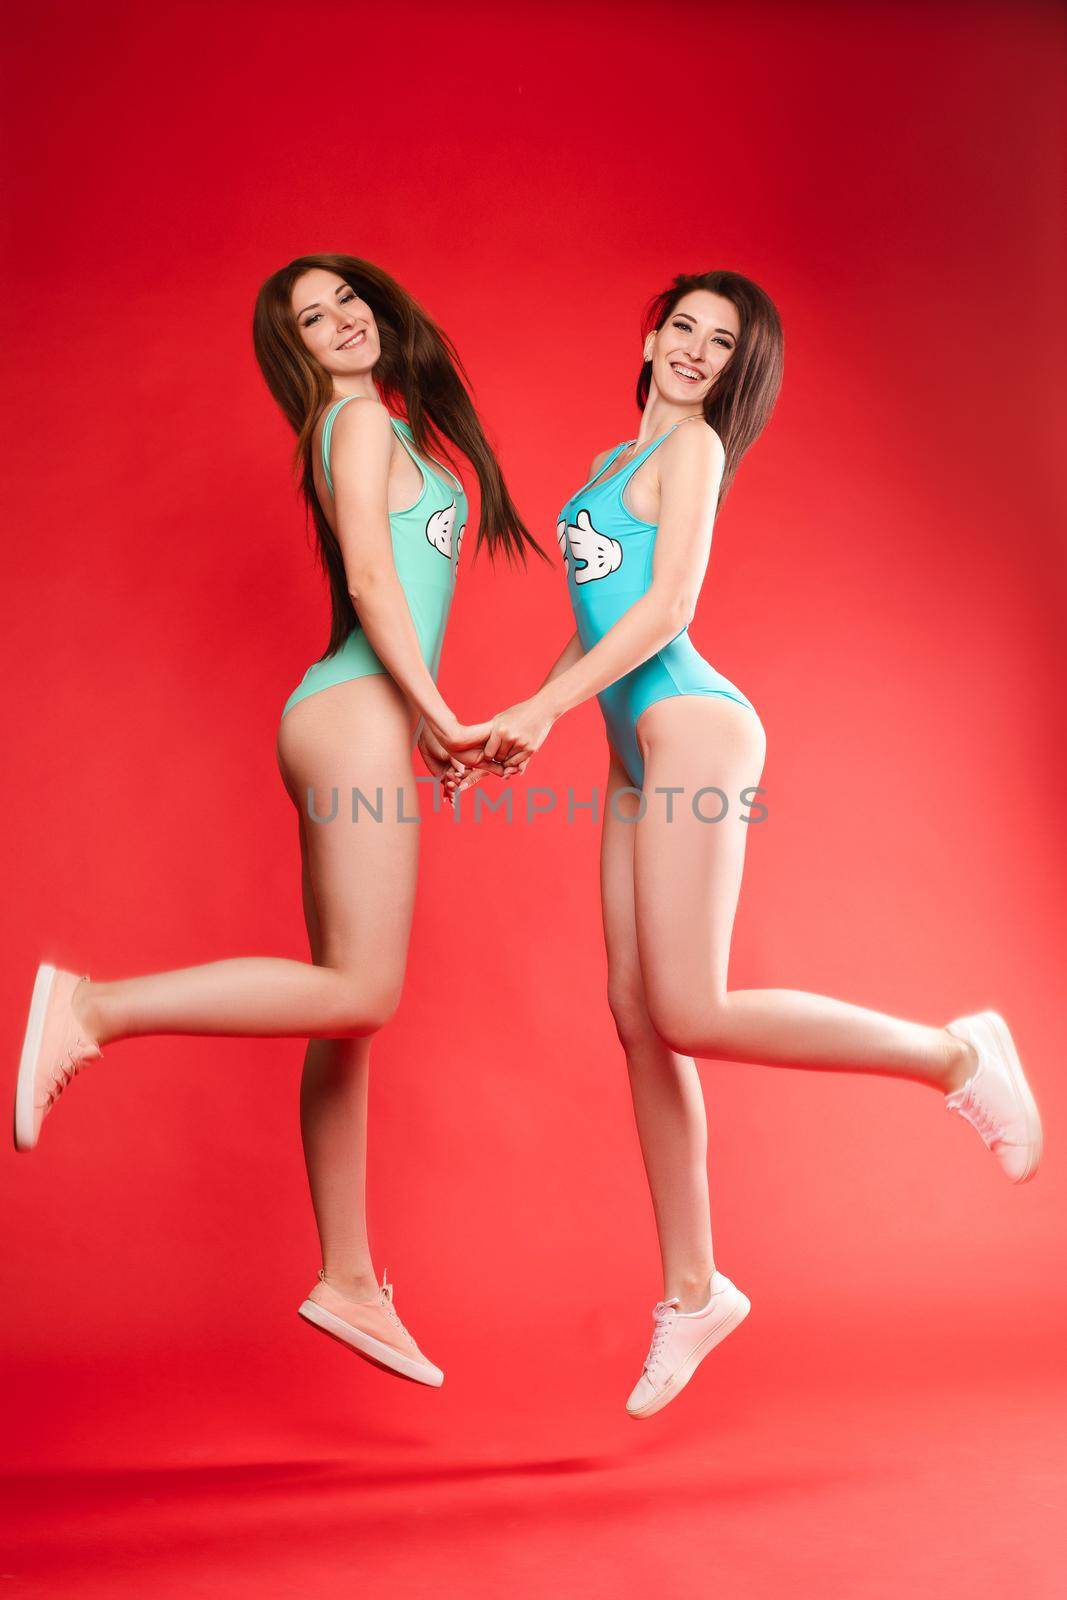 Side view of young models in swimming wear jumping together and laughing on red isolated background. Two active girl with long legs looking at camera and posing. Concept of fit and body.